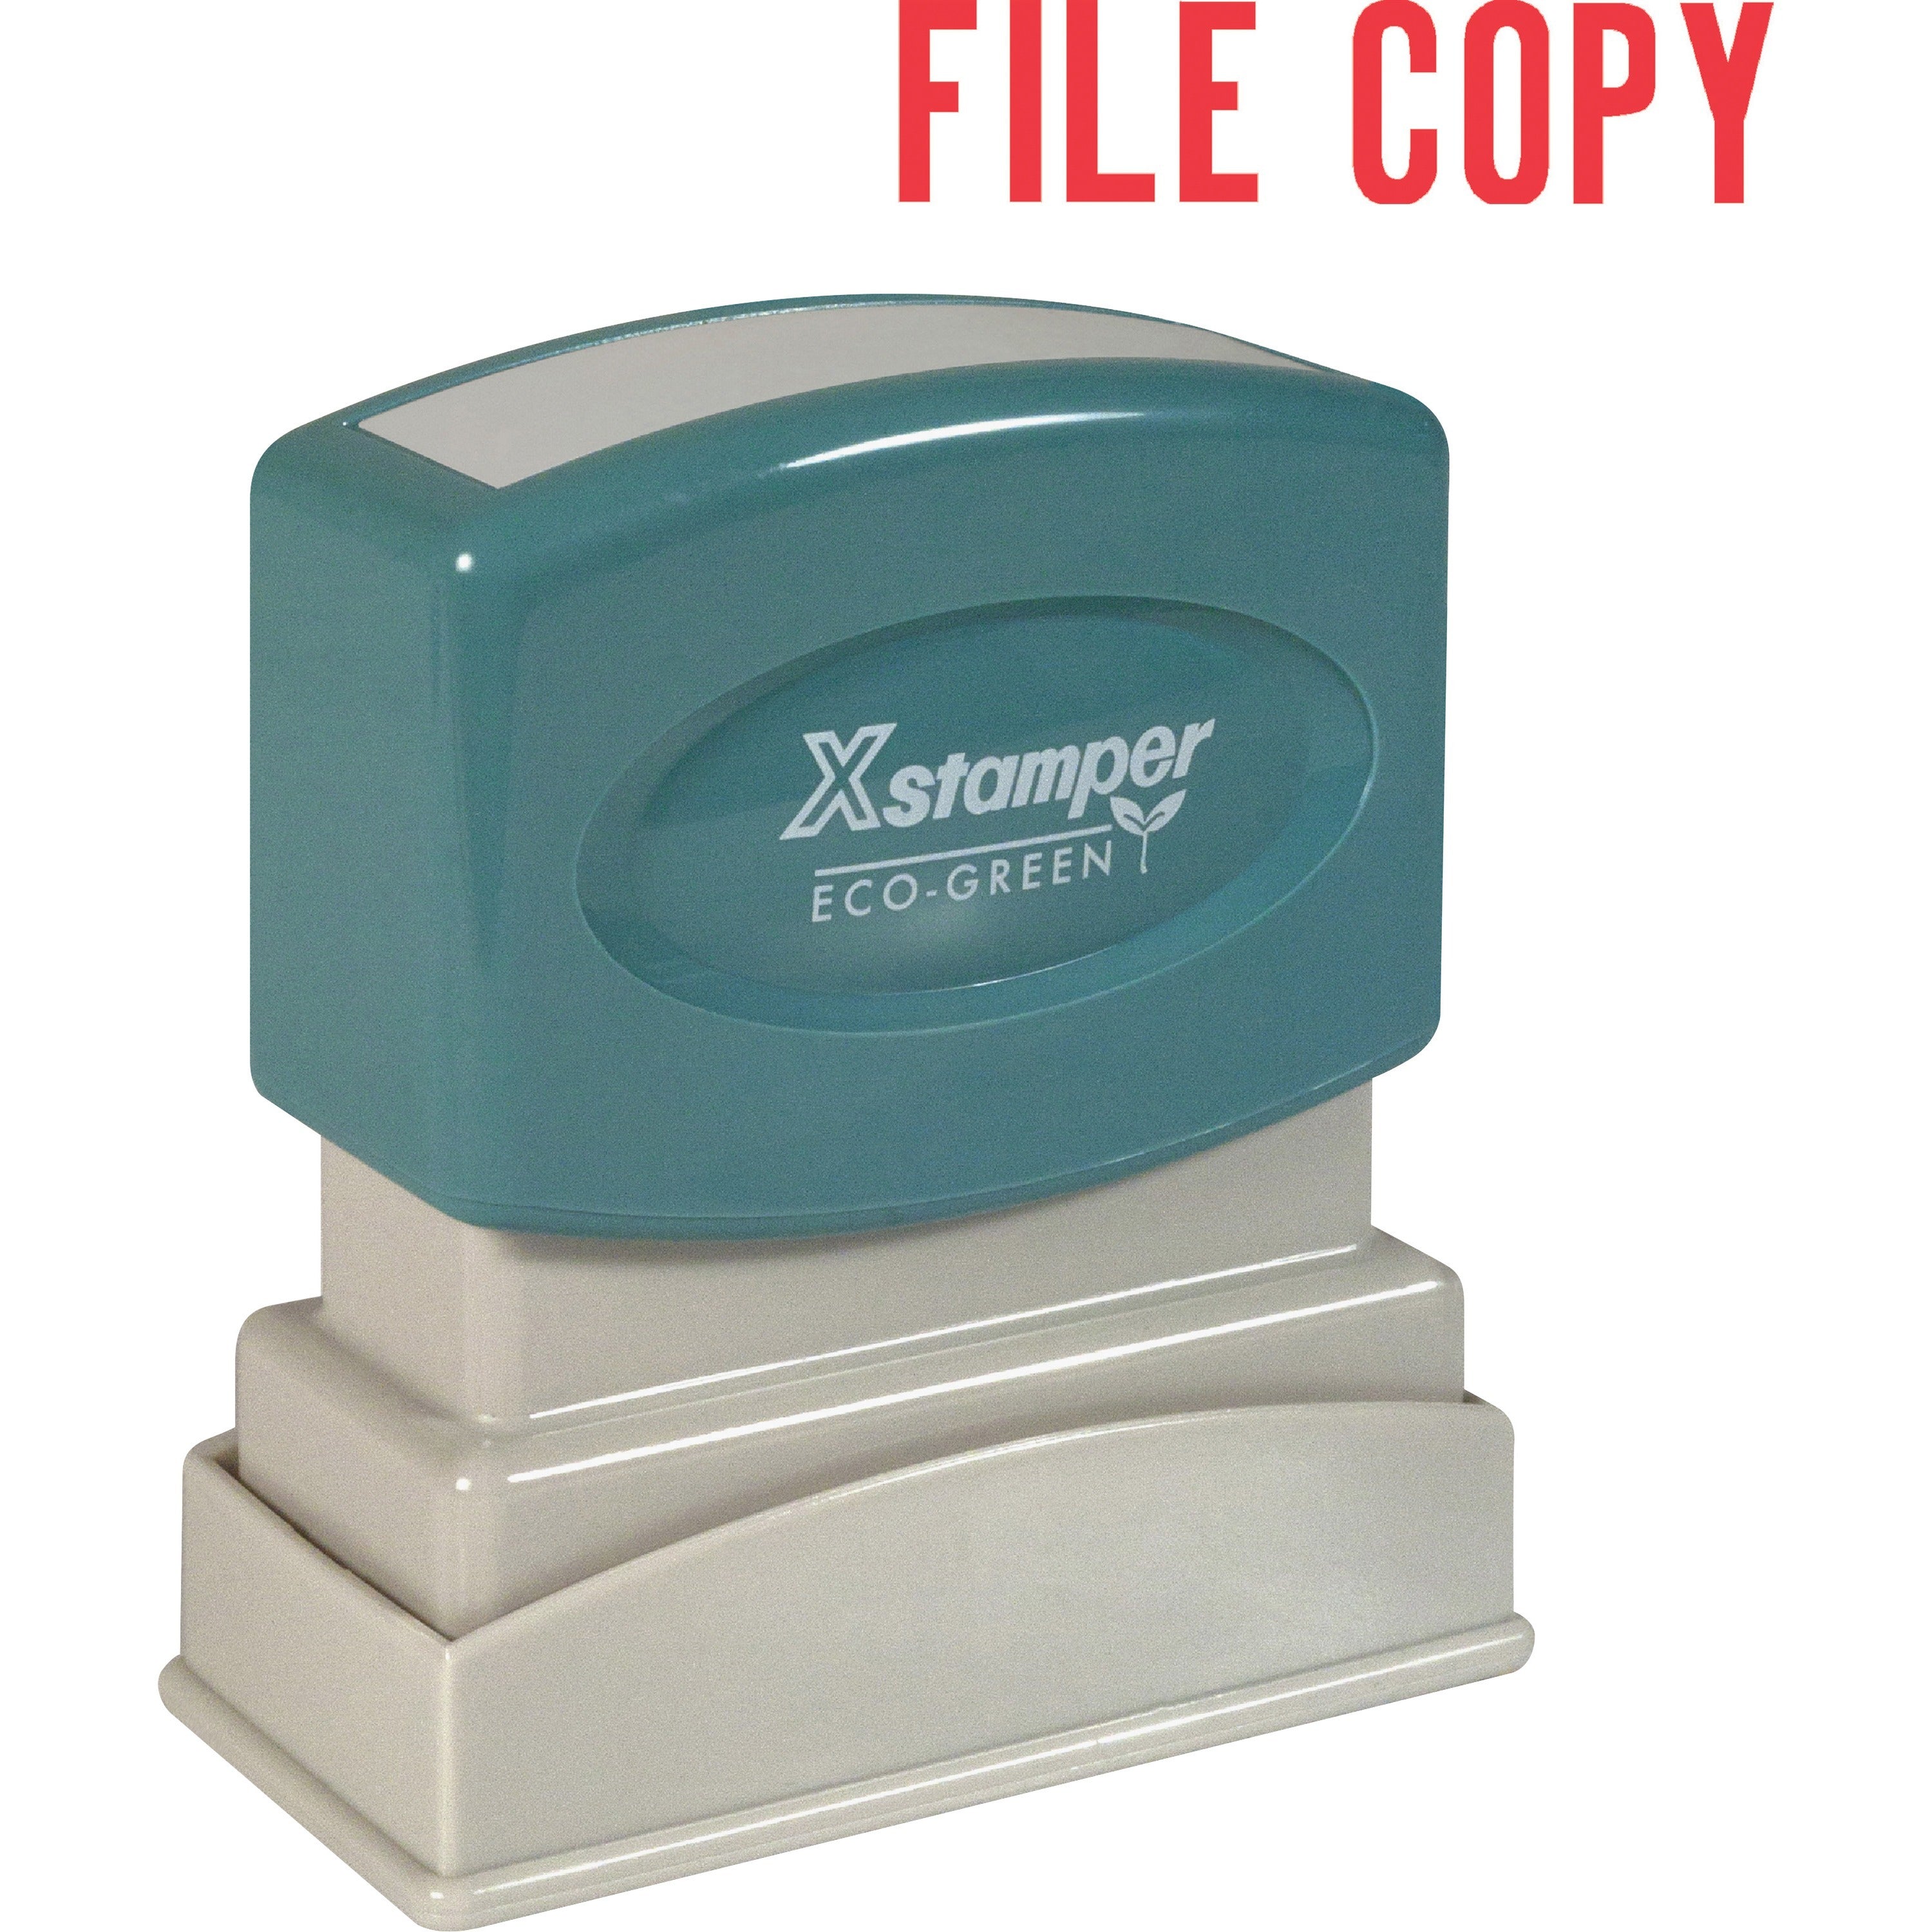 Xstamper FILE COPY Title Stamp - Message Stamp - "FILE COPY" - 0.50" Impression Width x 1.63" Impression Length - 100000 Impression(s) - Red - Recycled - 1 Each - 